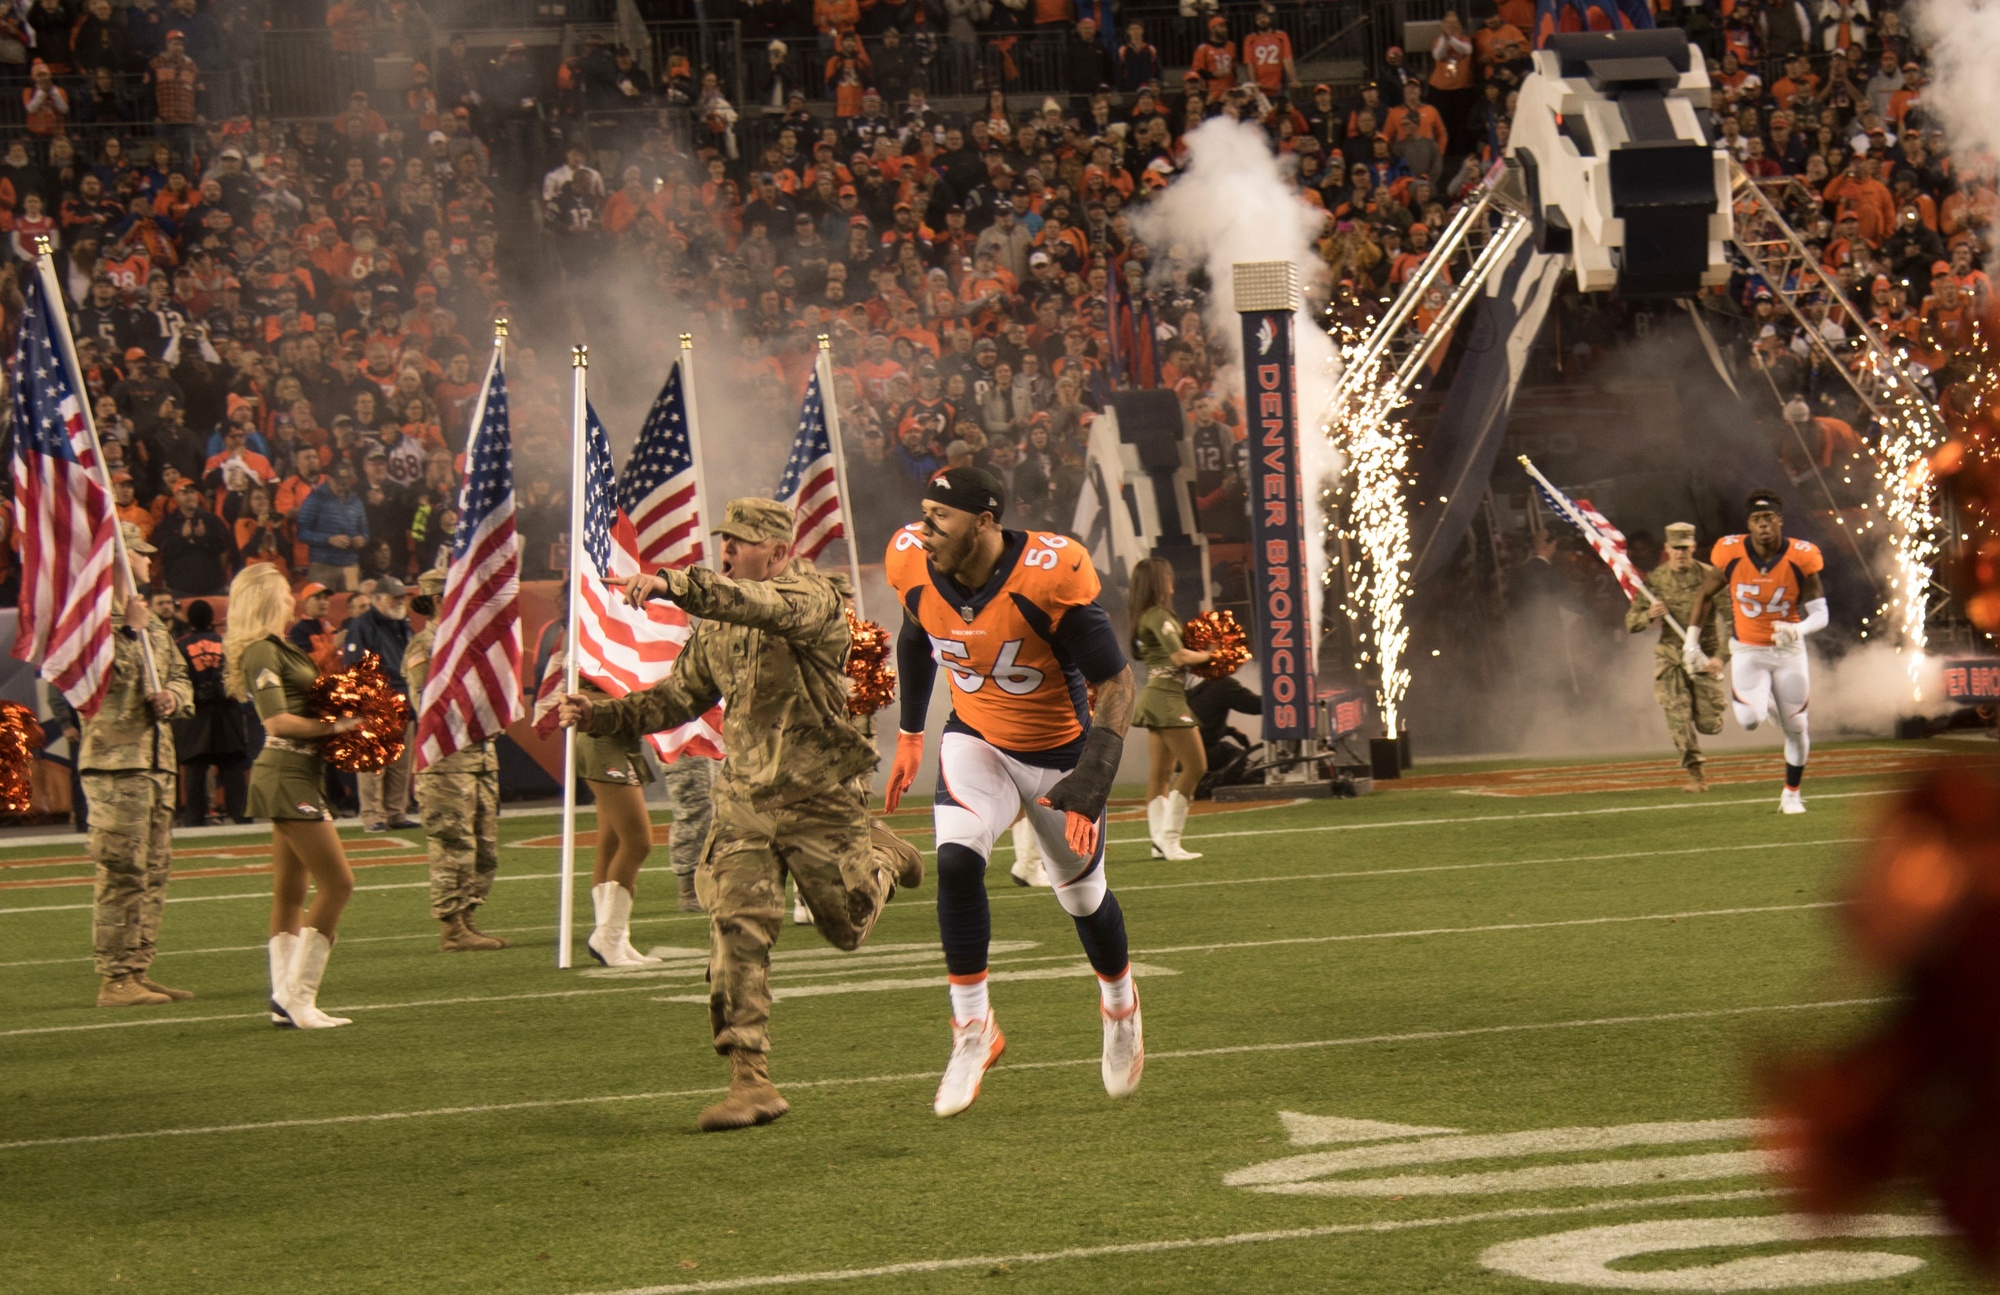 Team Buckley attends Broncos' Salute to Service game > Buckley